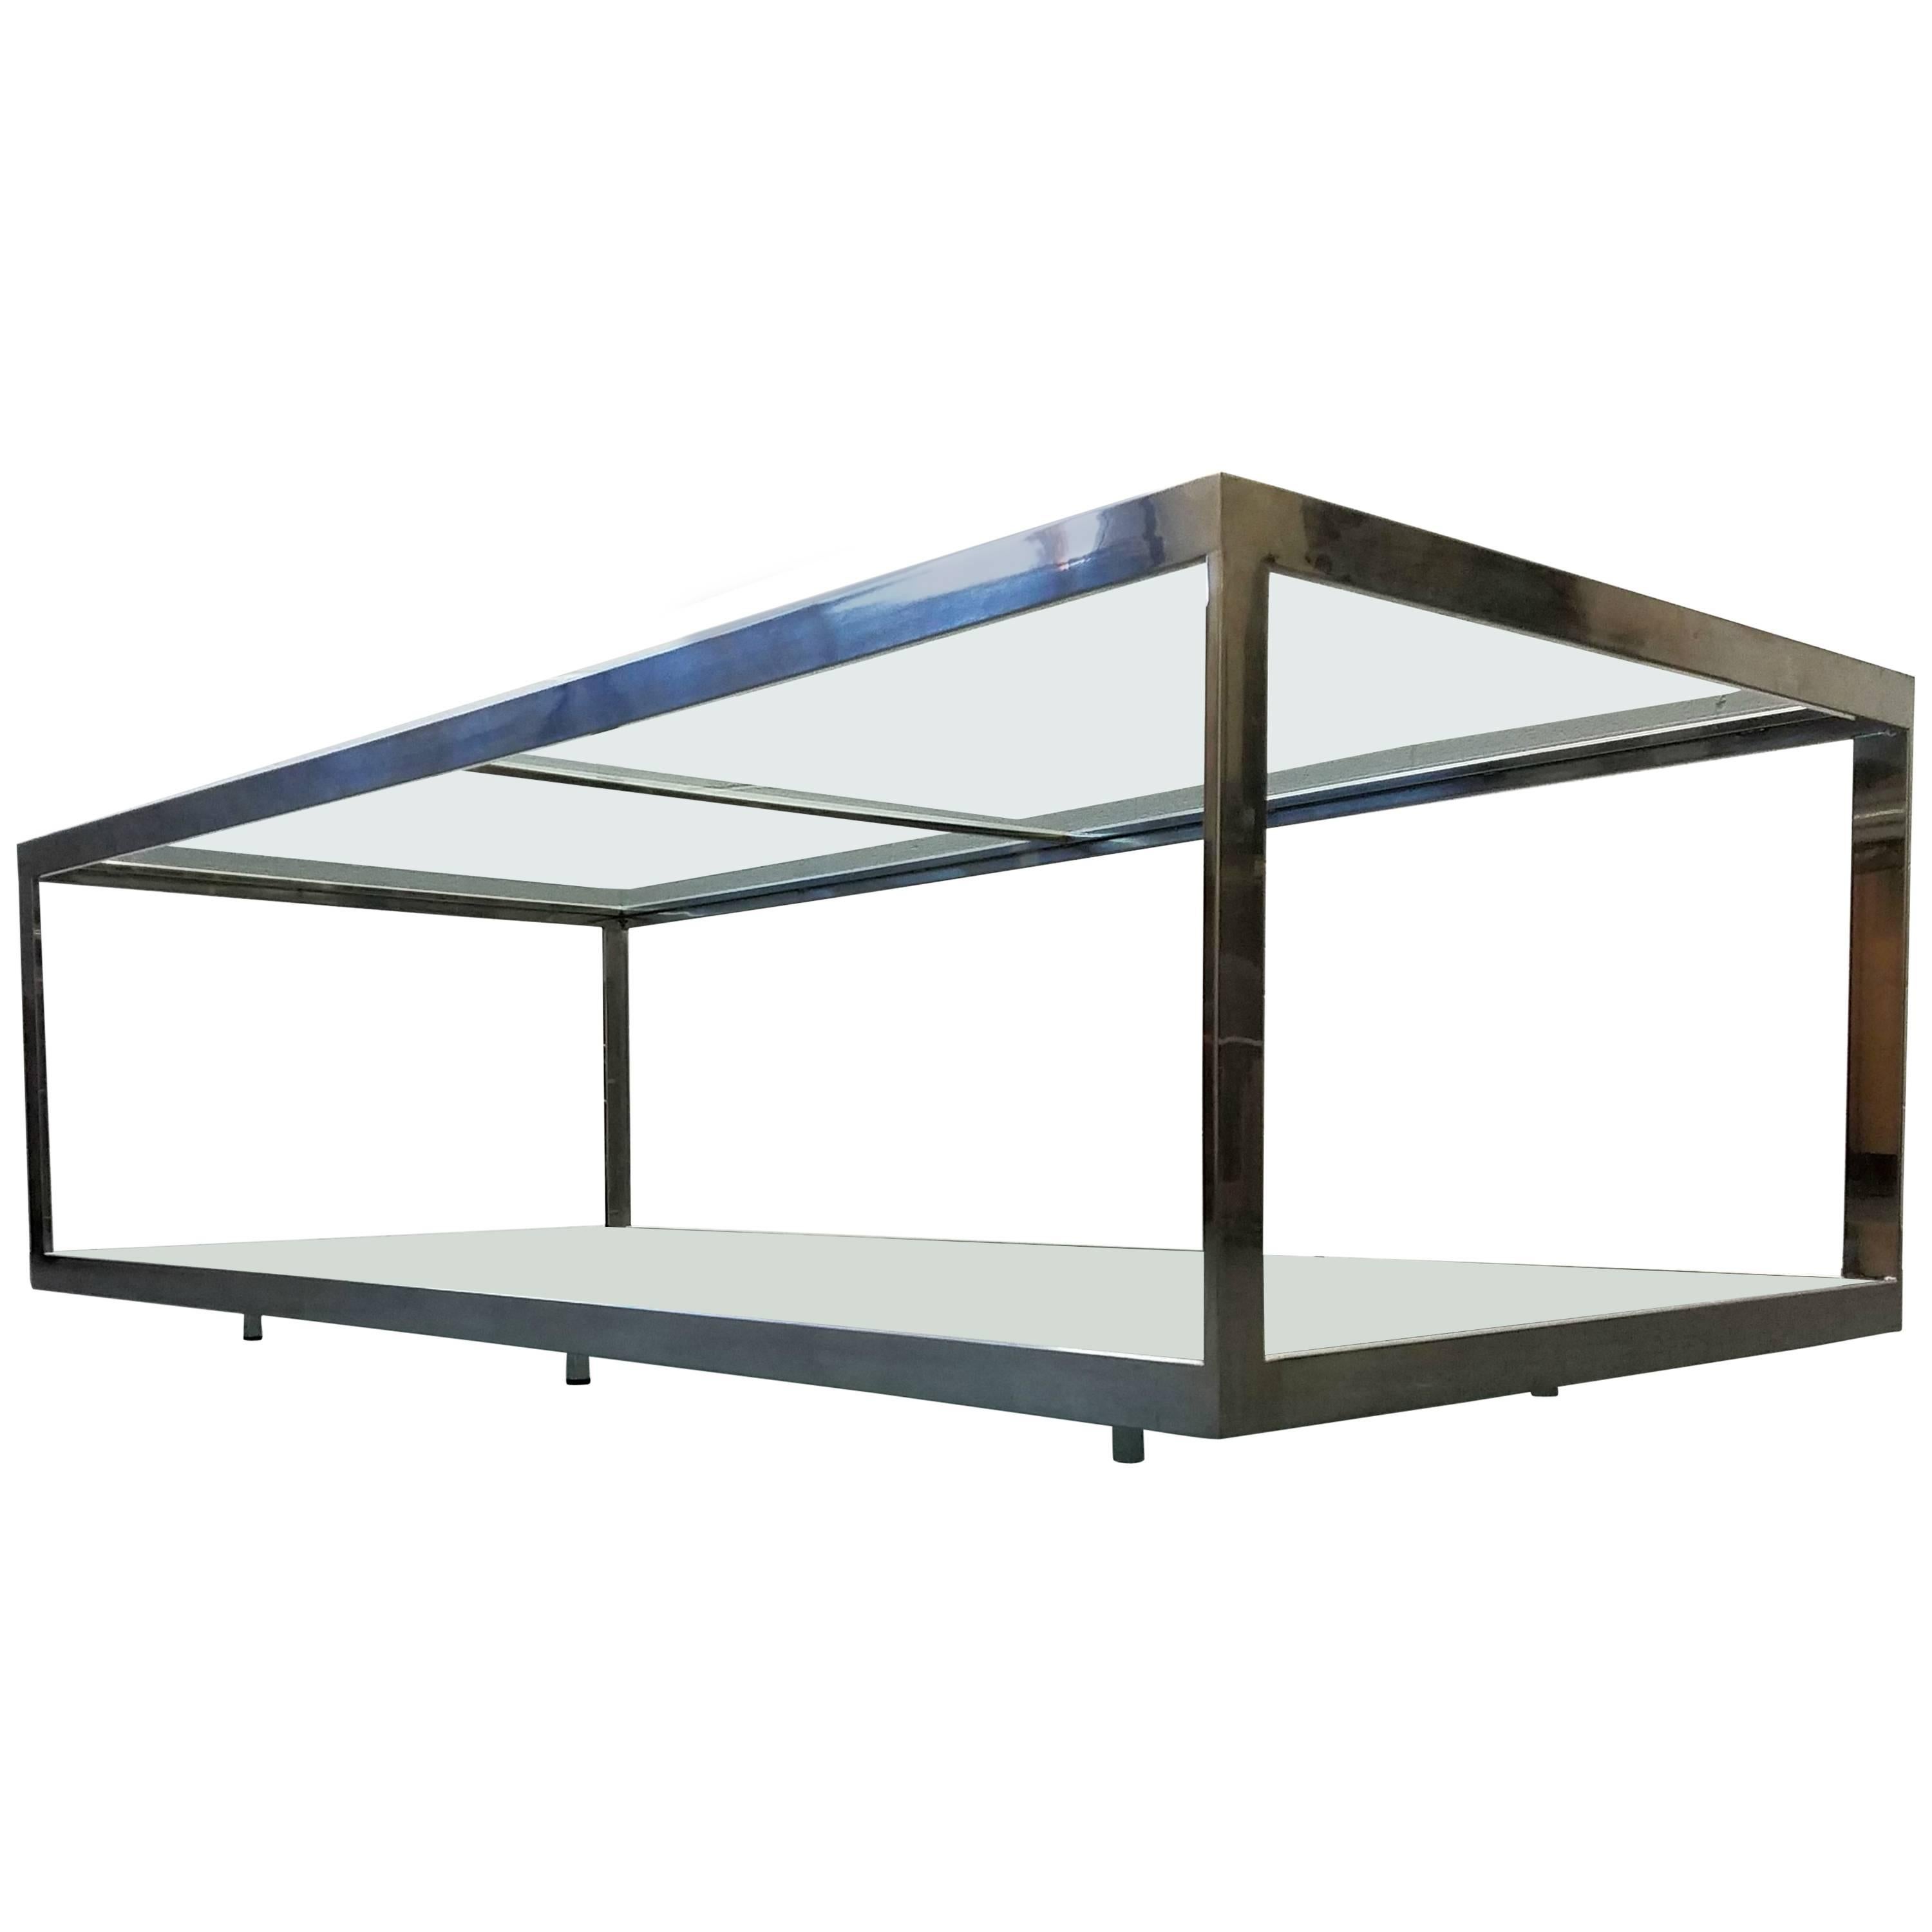 Monumental Two-Tier Chrome and Glass Midcentury Coffee Table